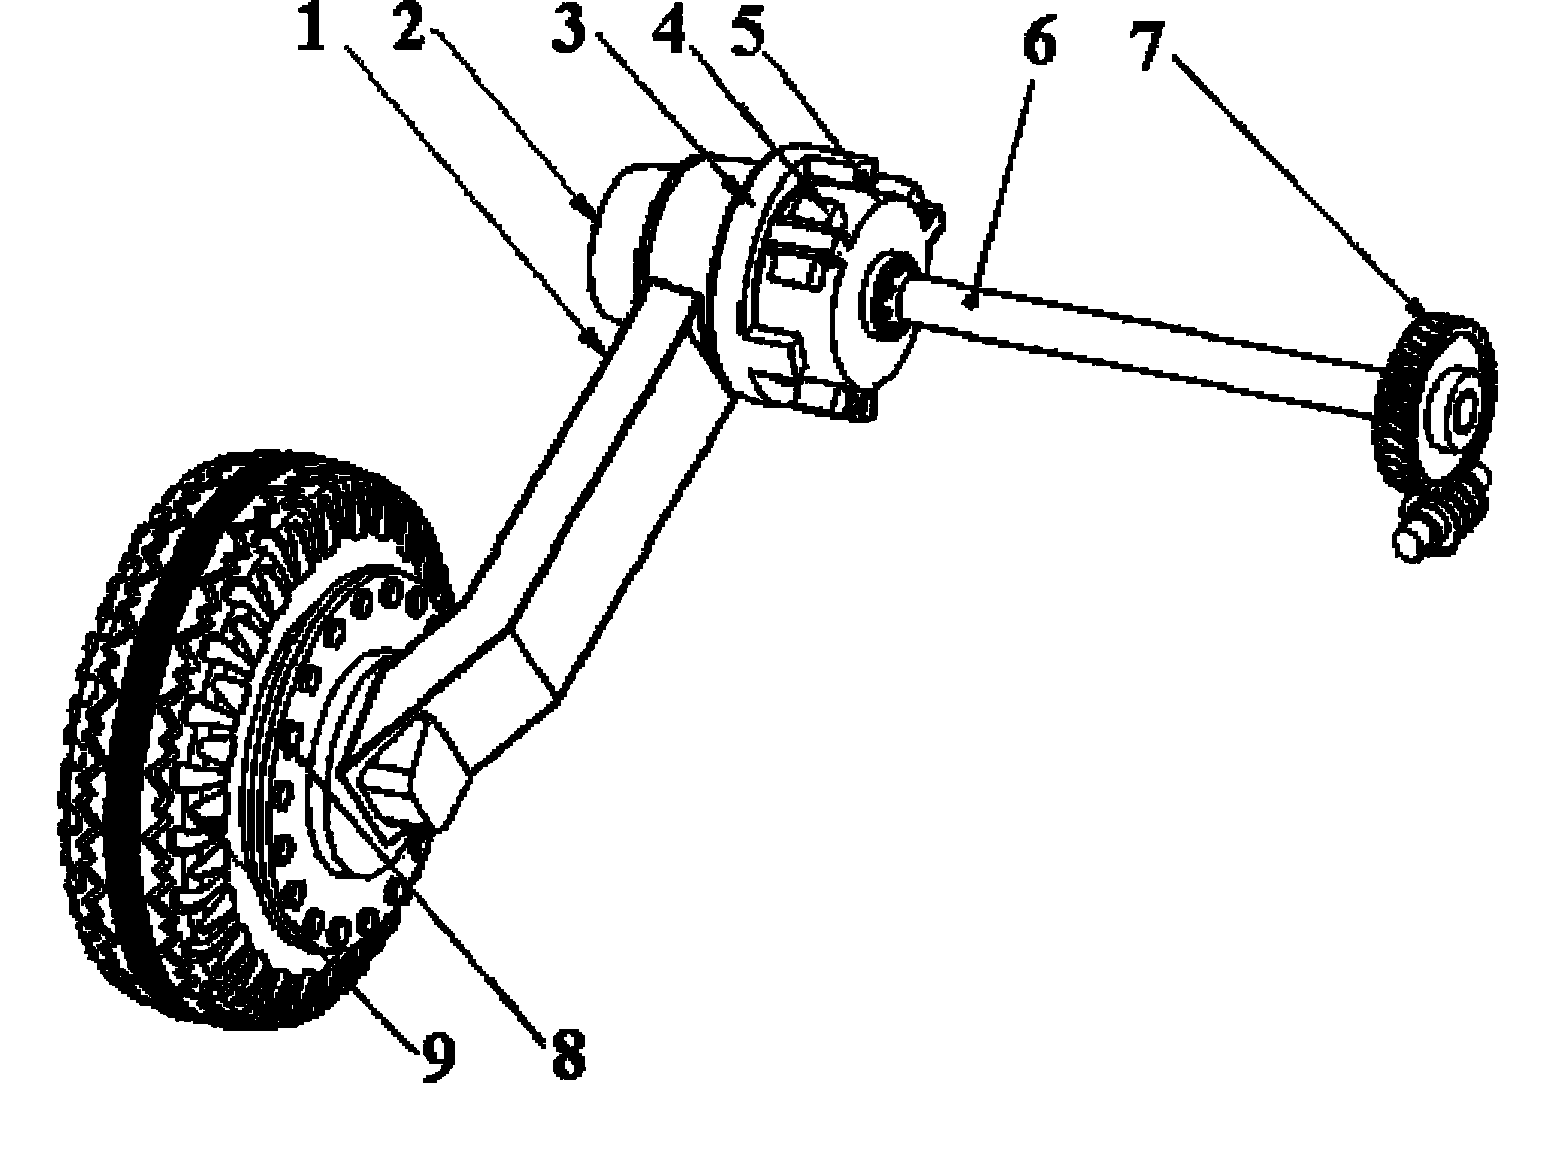 Torsion bar suspension realizing circumferential rotation adjustment and self-locking by worm and gear